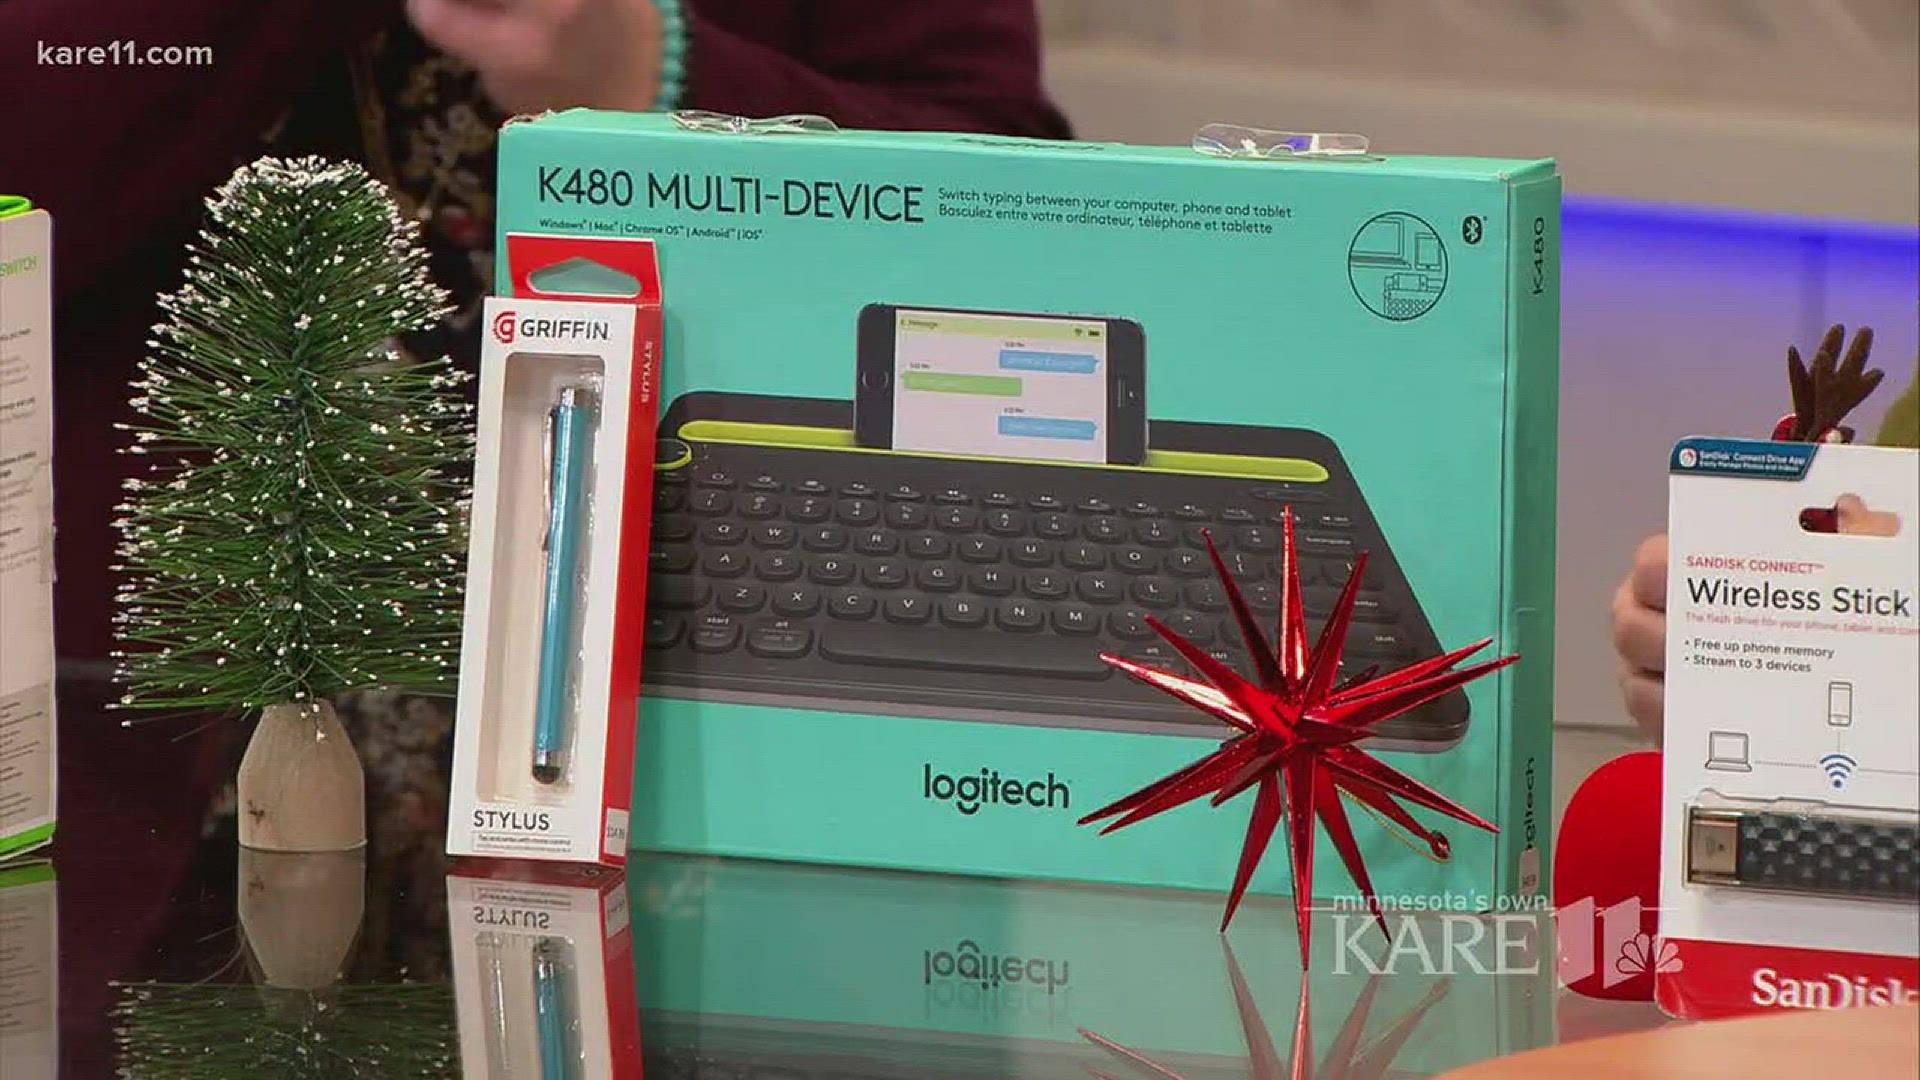 Whether looking for a last-minute gift or the perfect stocking stuffer, these devices could fit the bill and not break your budget. http://kare11.tv/2iUrw1J